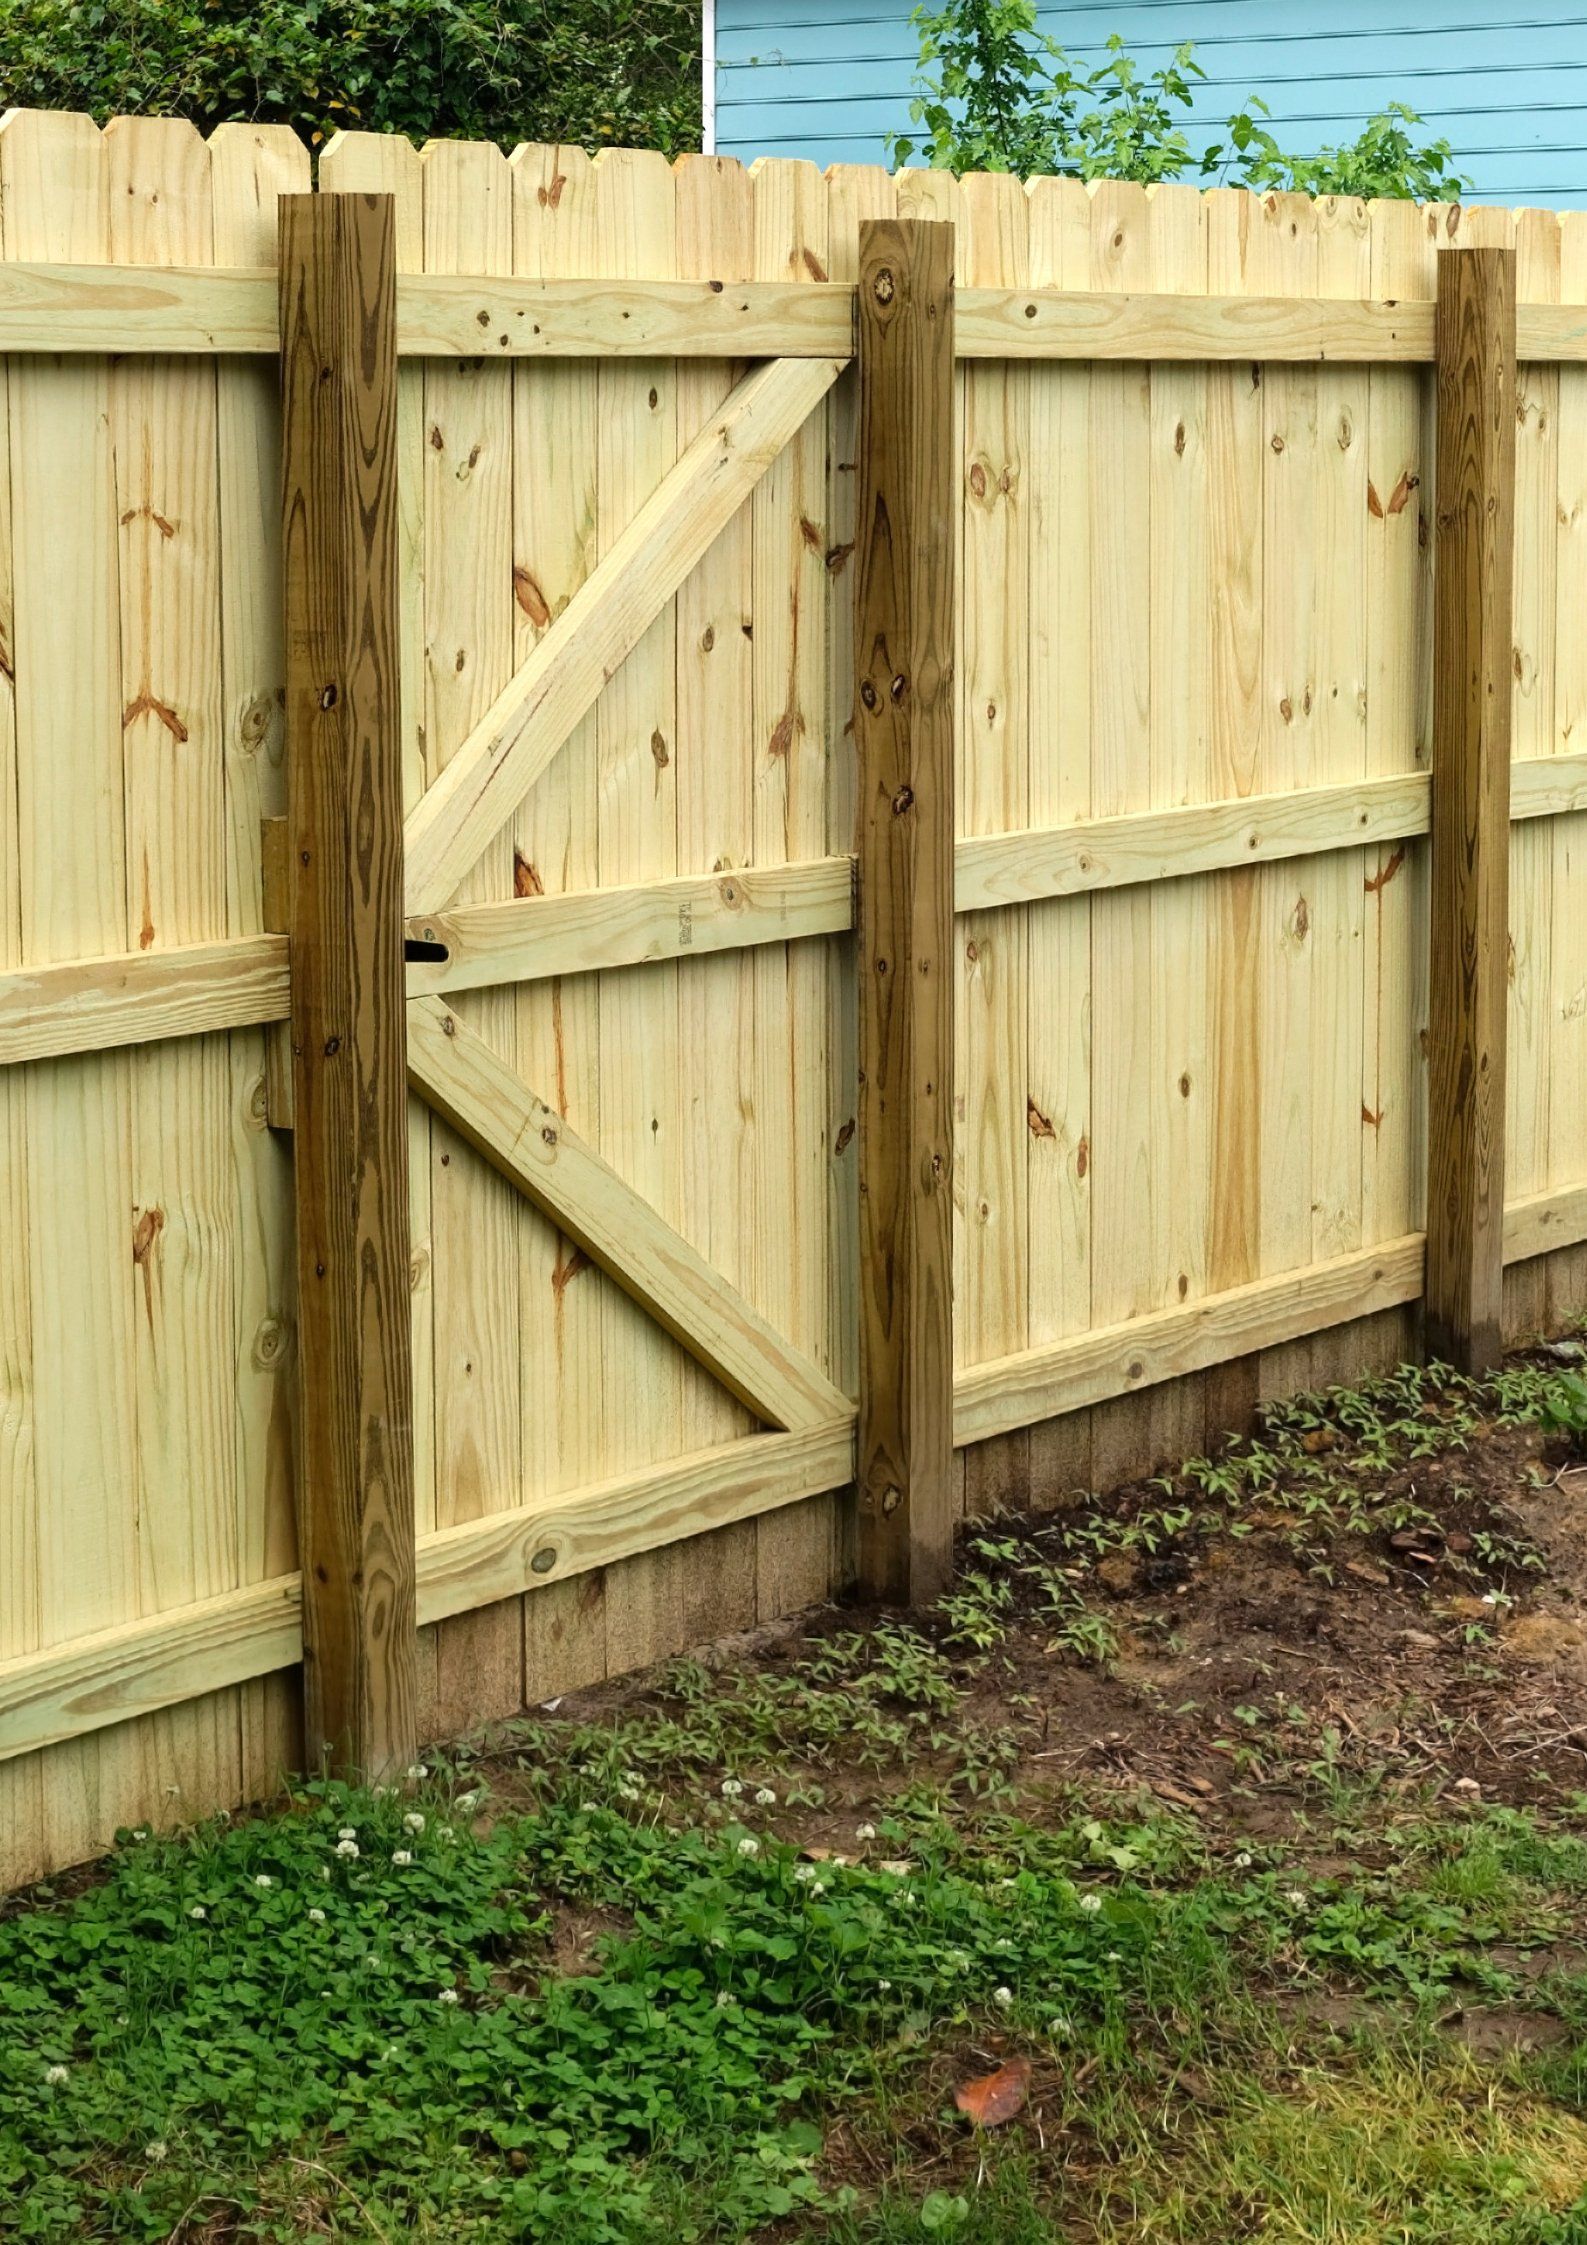 This is a photo of a wooden fence, the work was carried out by Fencing Leicester